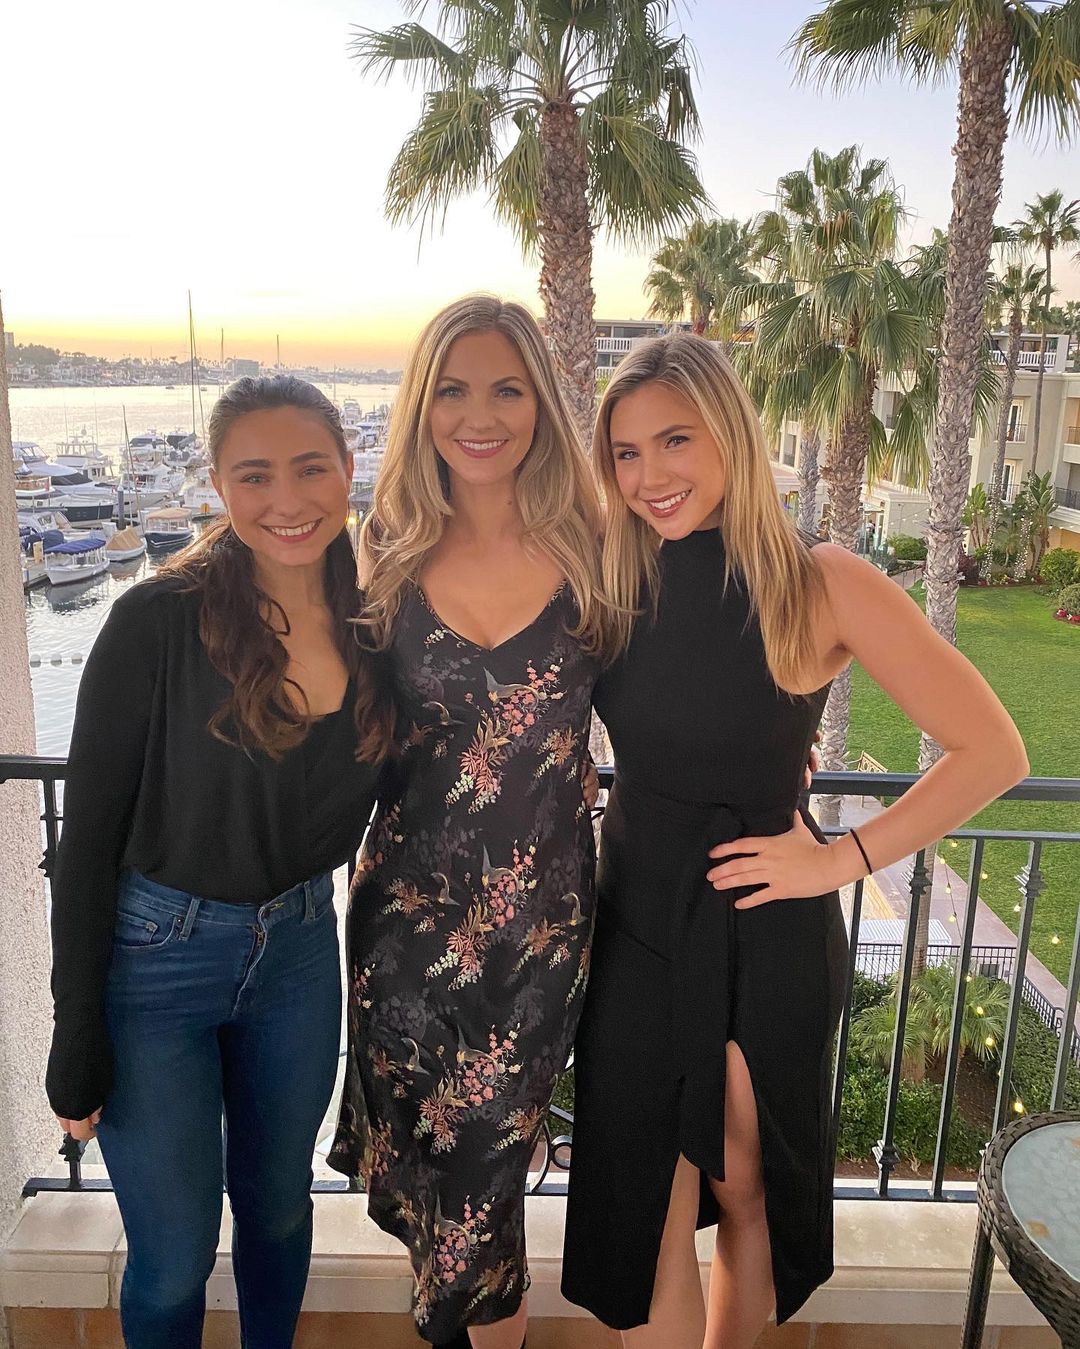 Sister Of Brandon Crawford: Jenna (Left), Amy (Middle) & Kaitlin Crawford (Right)